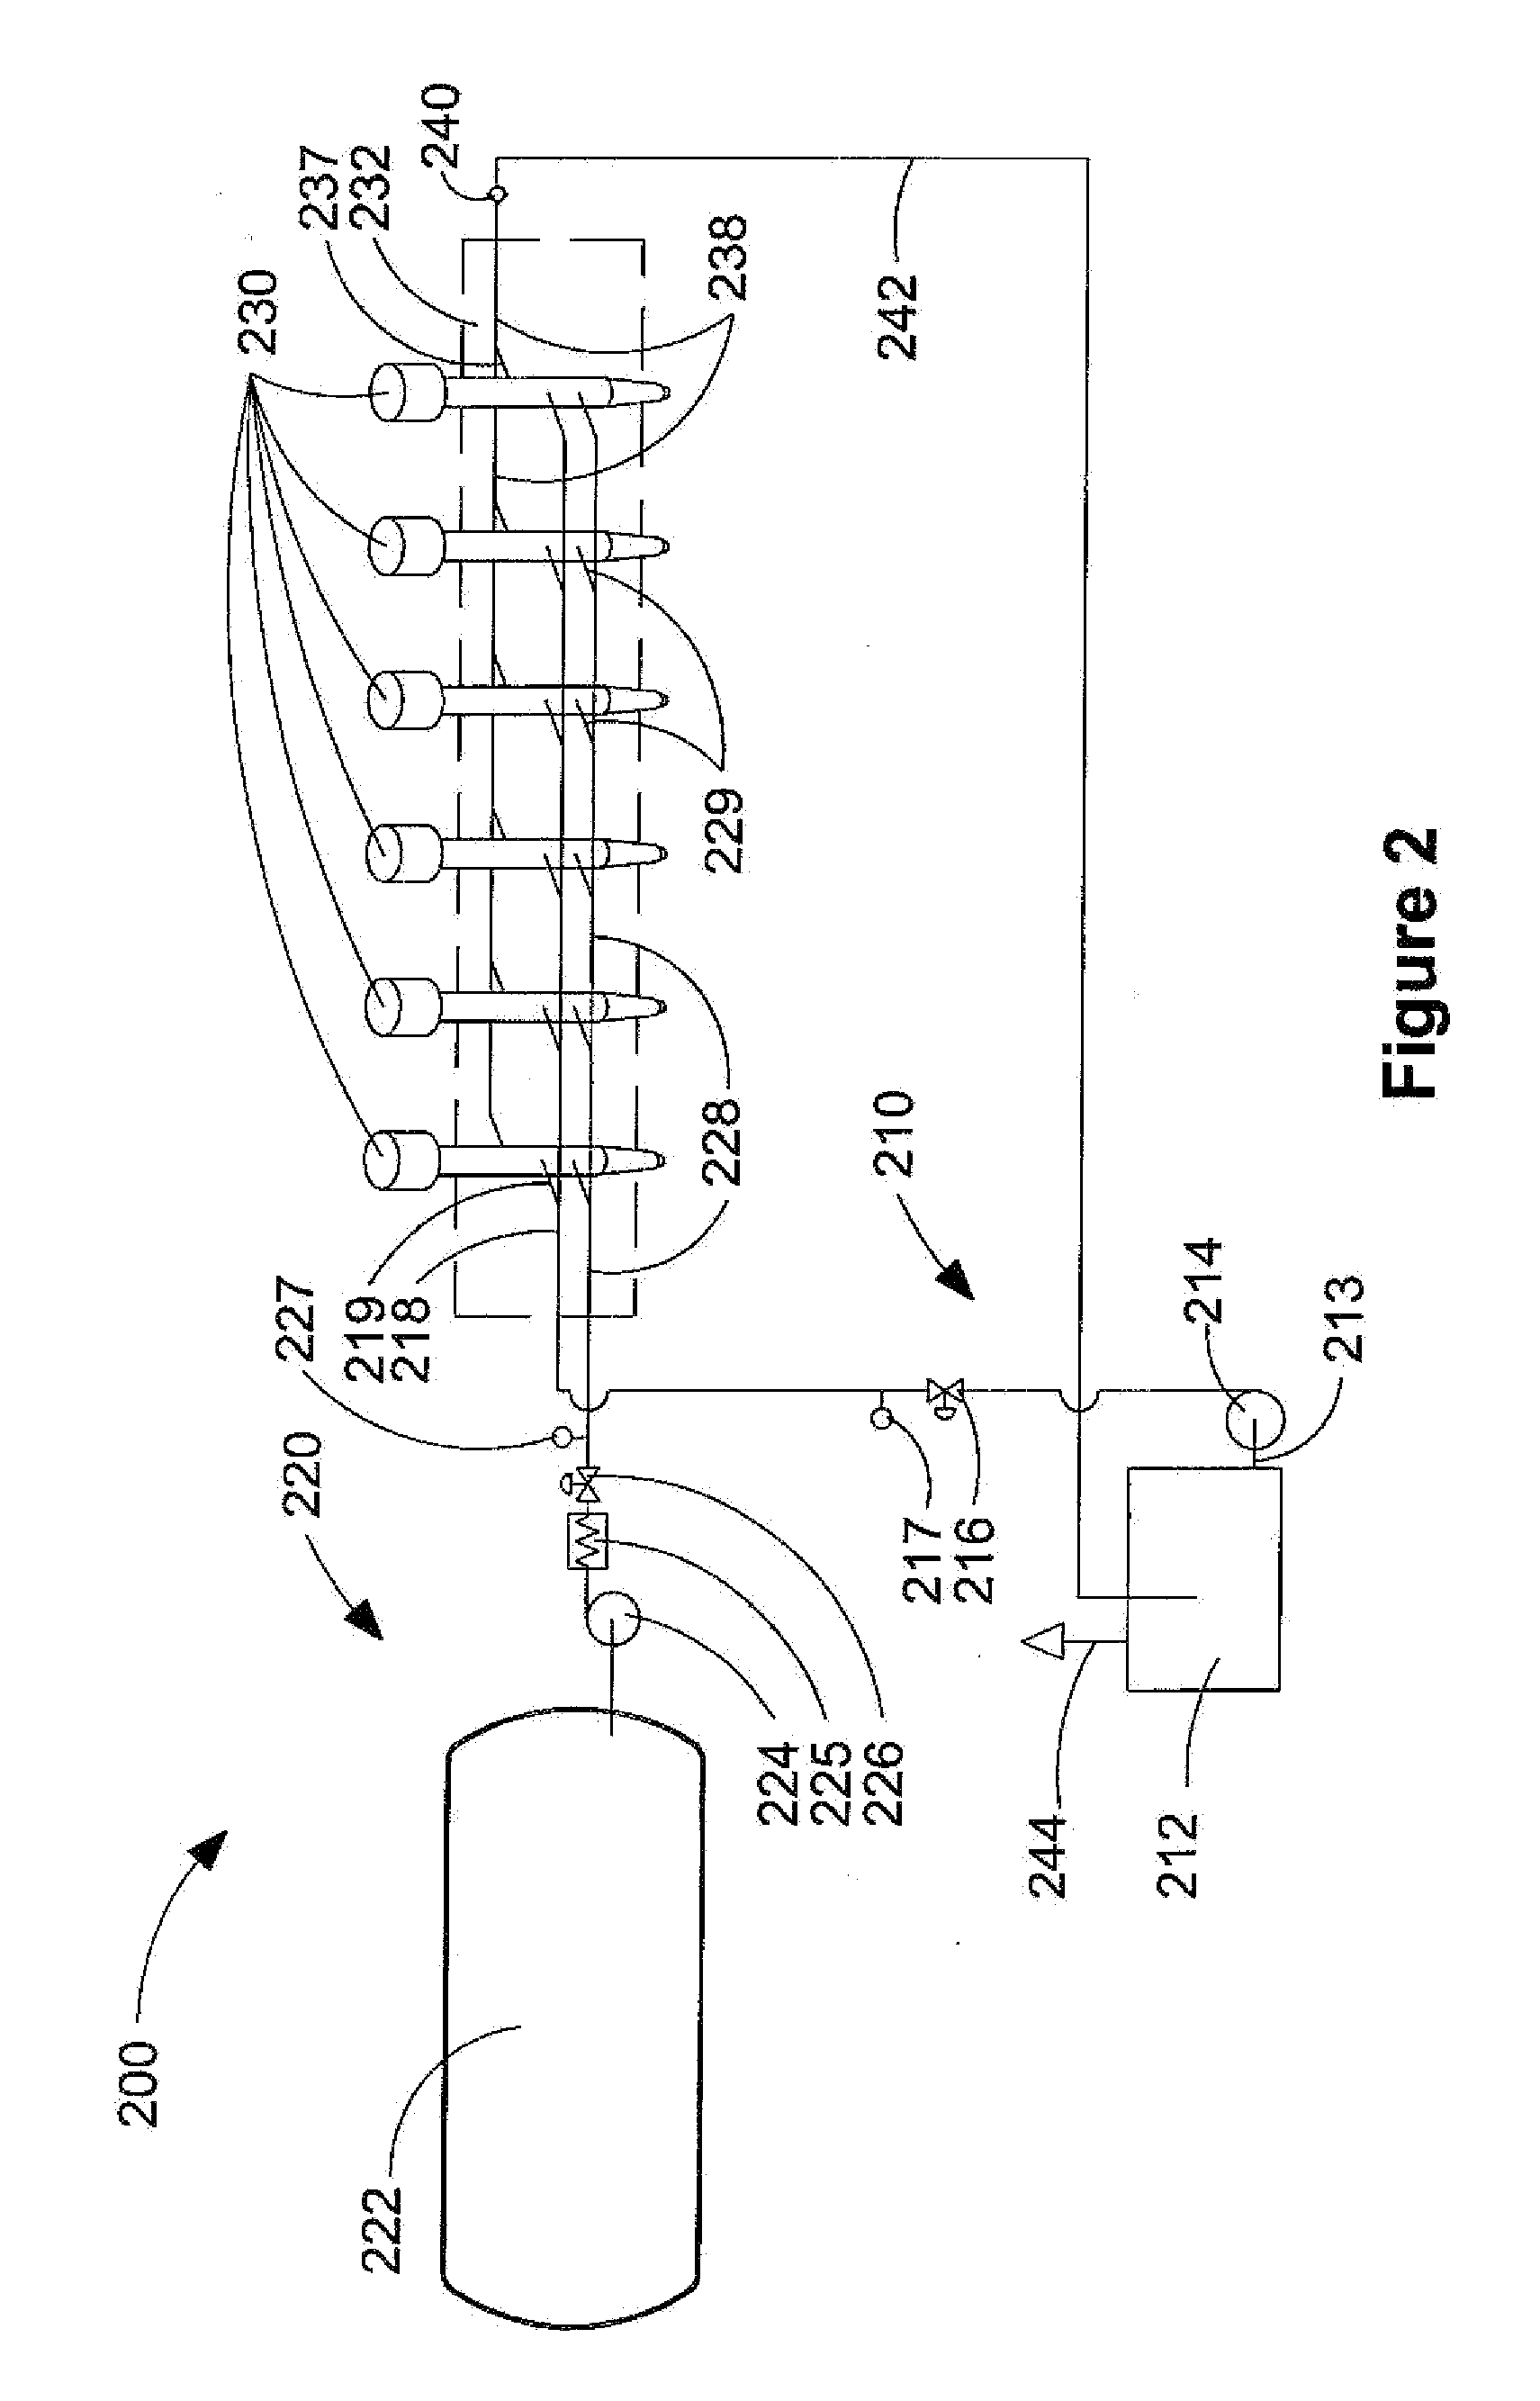 Method And Apparatus For Delivering Two Fuels To A Direct Injection Internal Combustion Engine